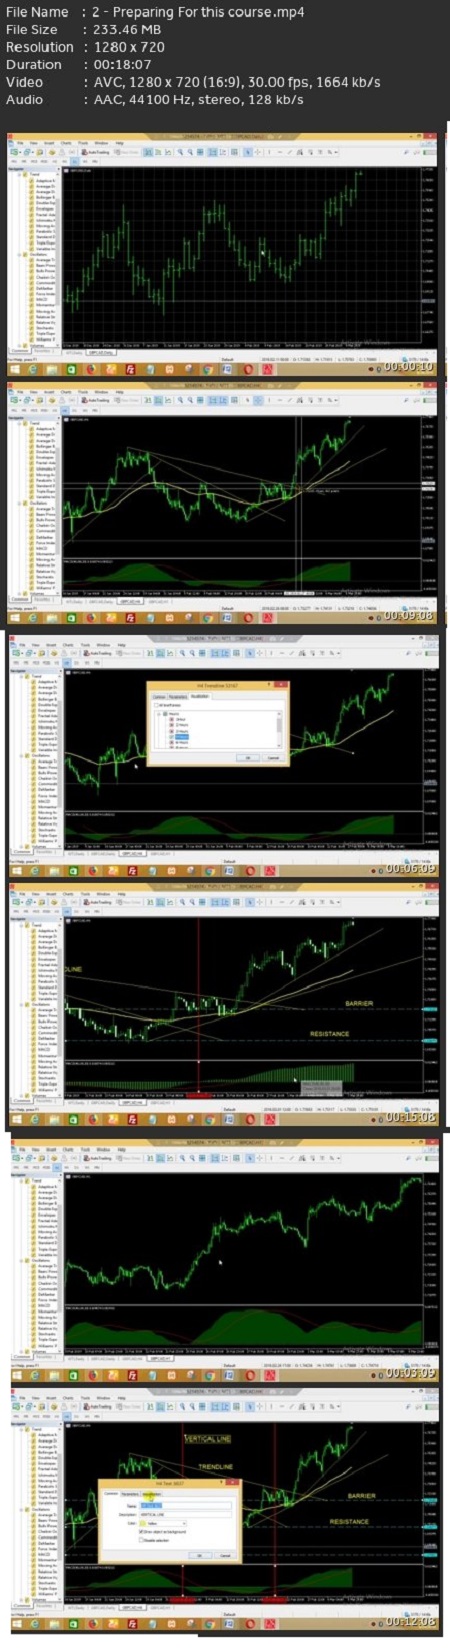 Trade Stocks, Shares, Currencies With Candle Walk Strategy by Gbenga Odeyale Albert